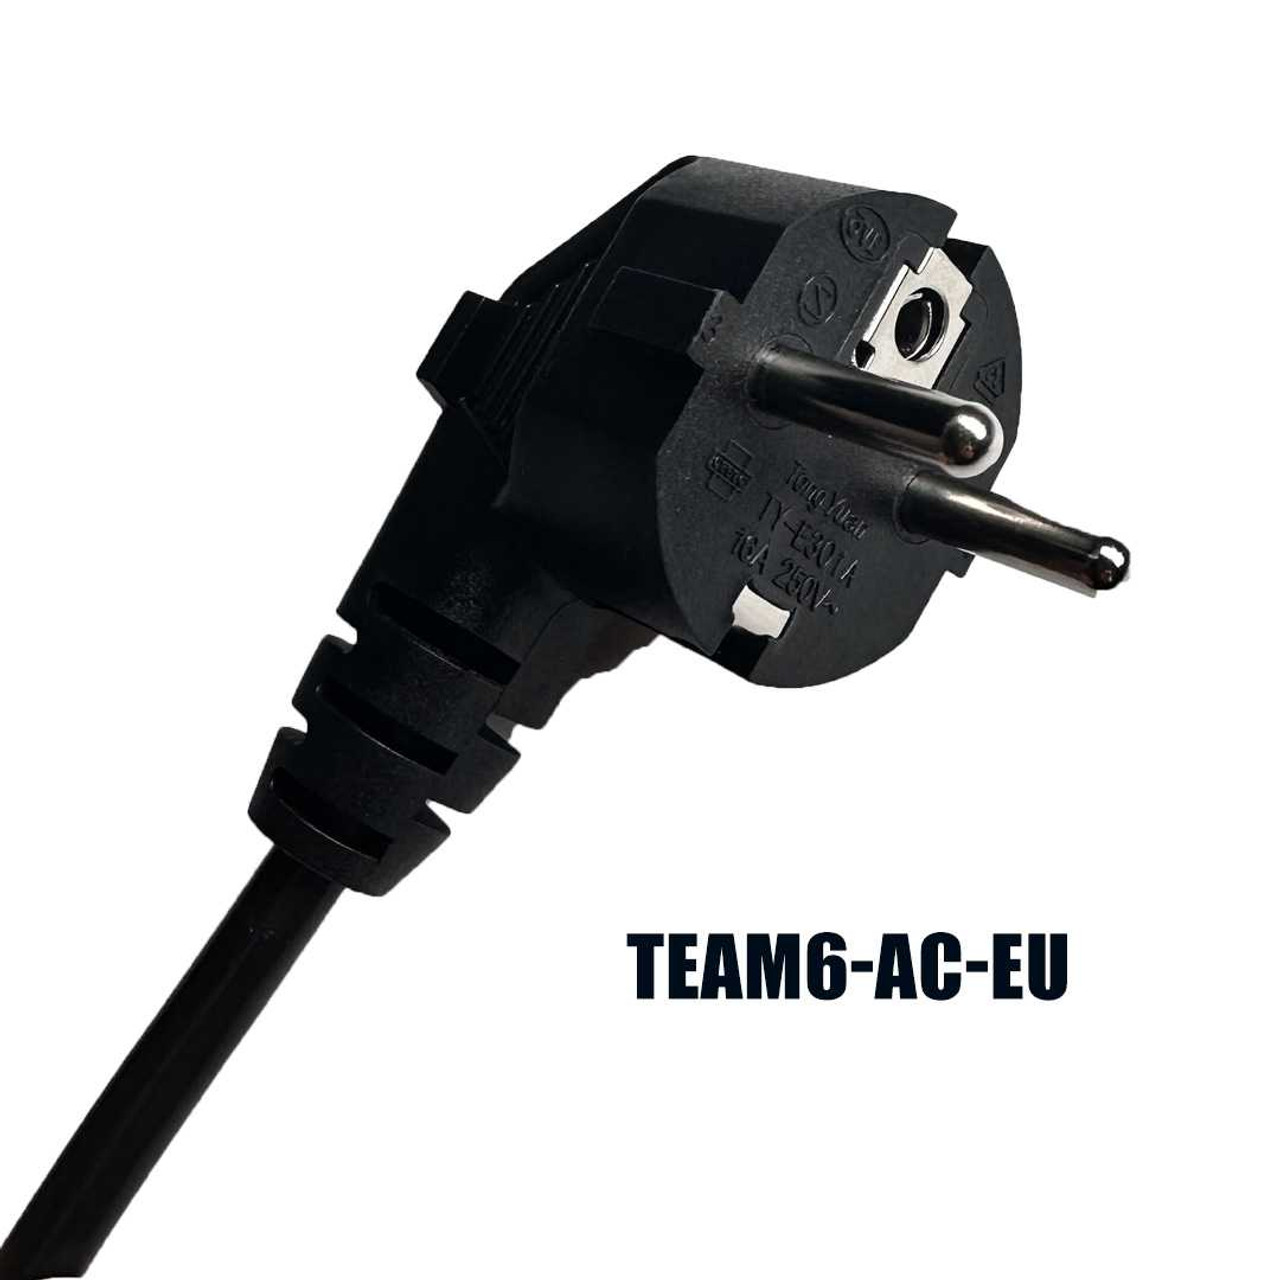 TEAM6 Replacement Charger Cable kleinelectronics.com 15